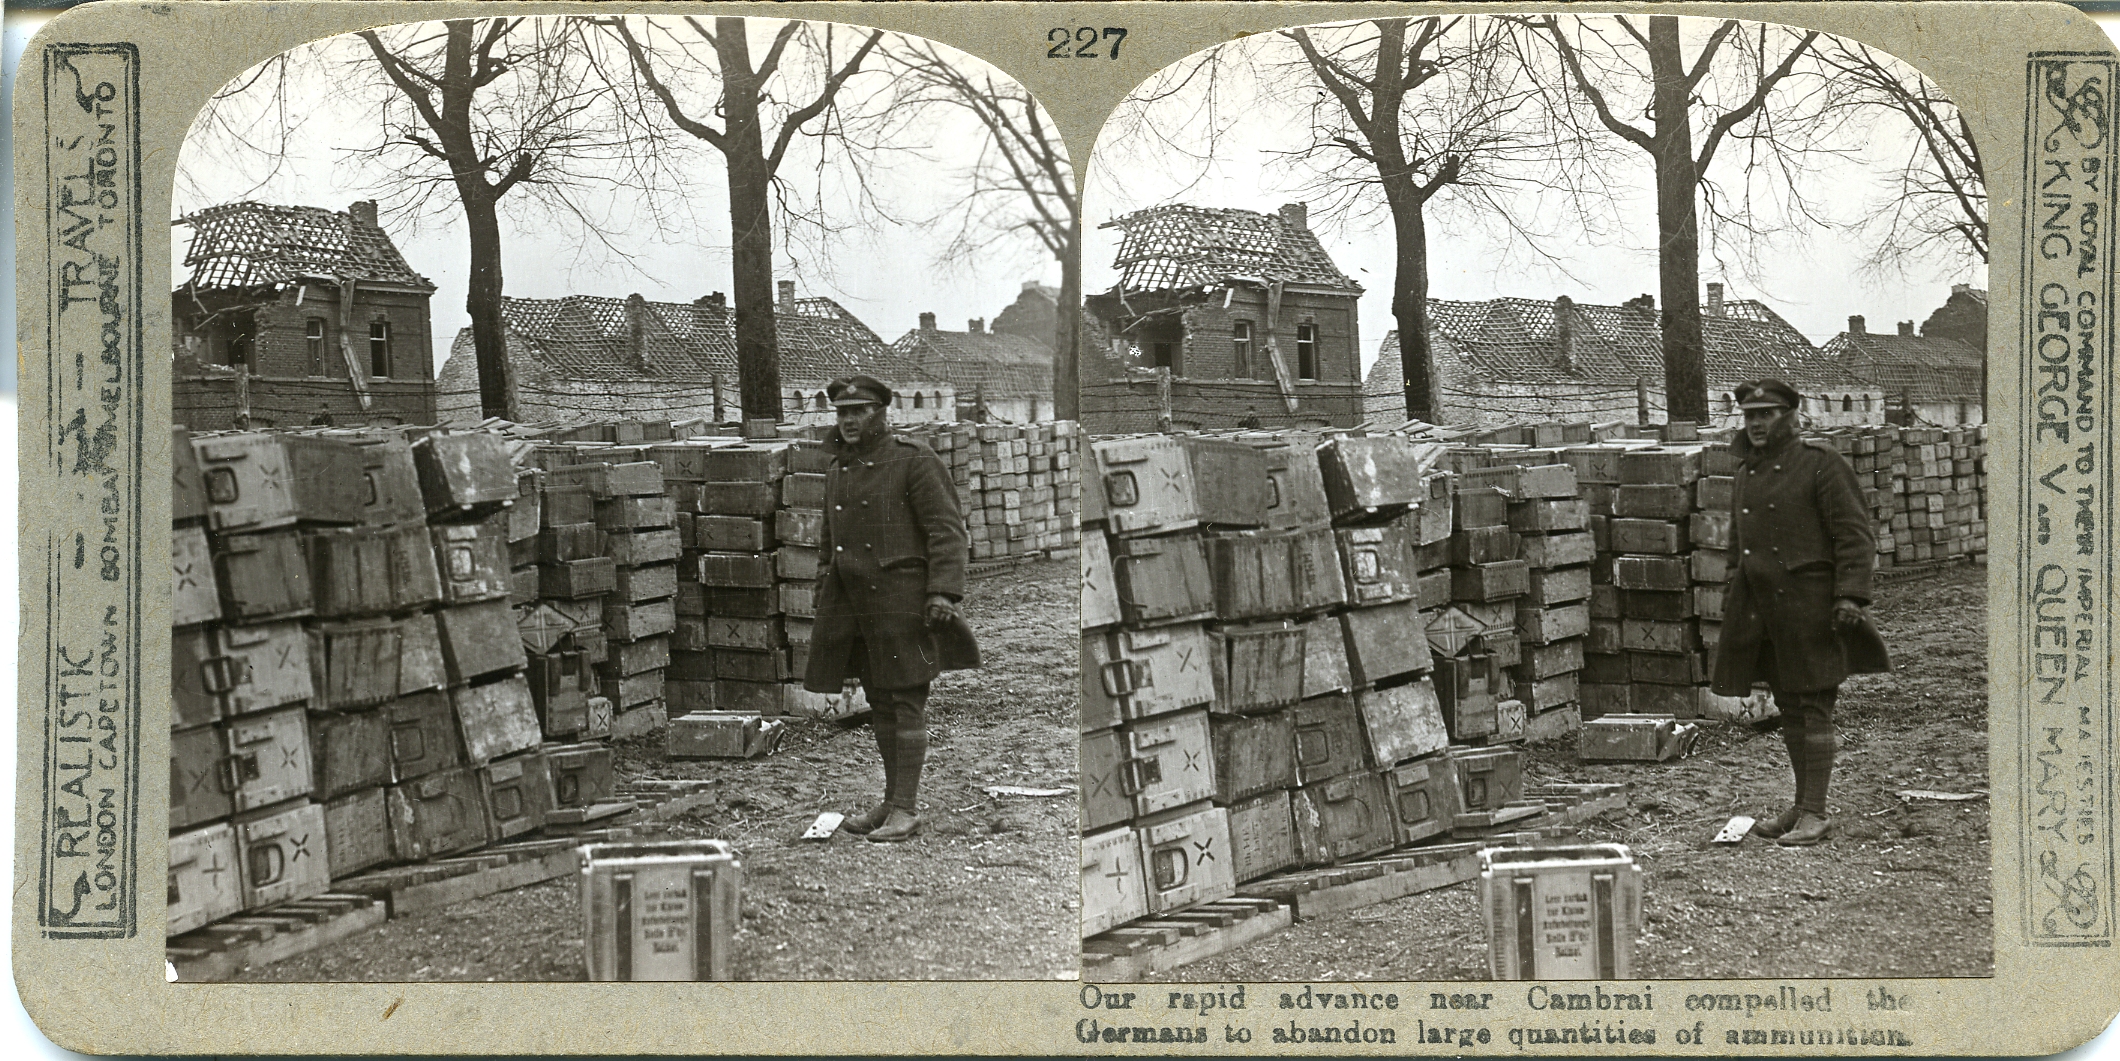 Our rapid advance near Cambrai compelled the Germans to abandon large quantities of ammunition